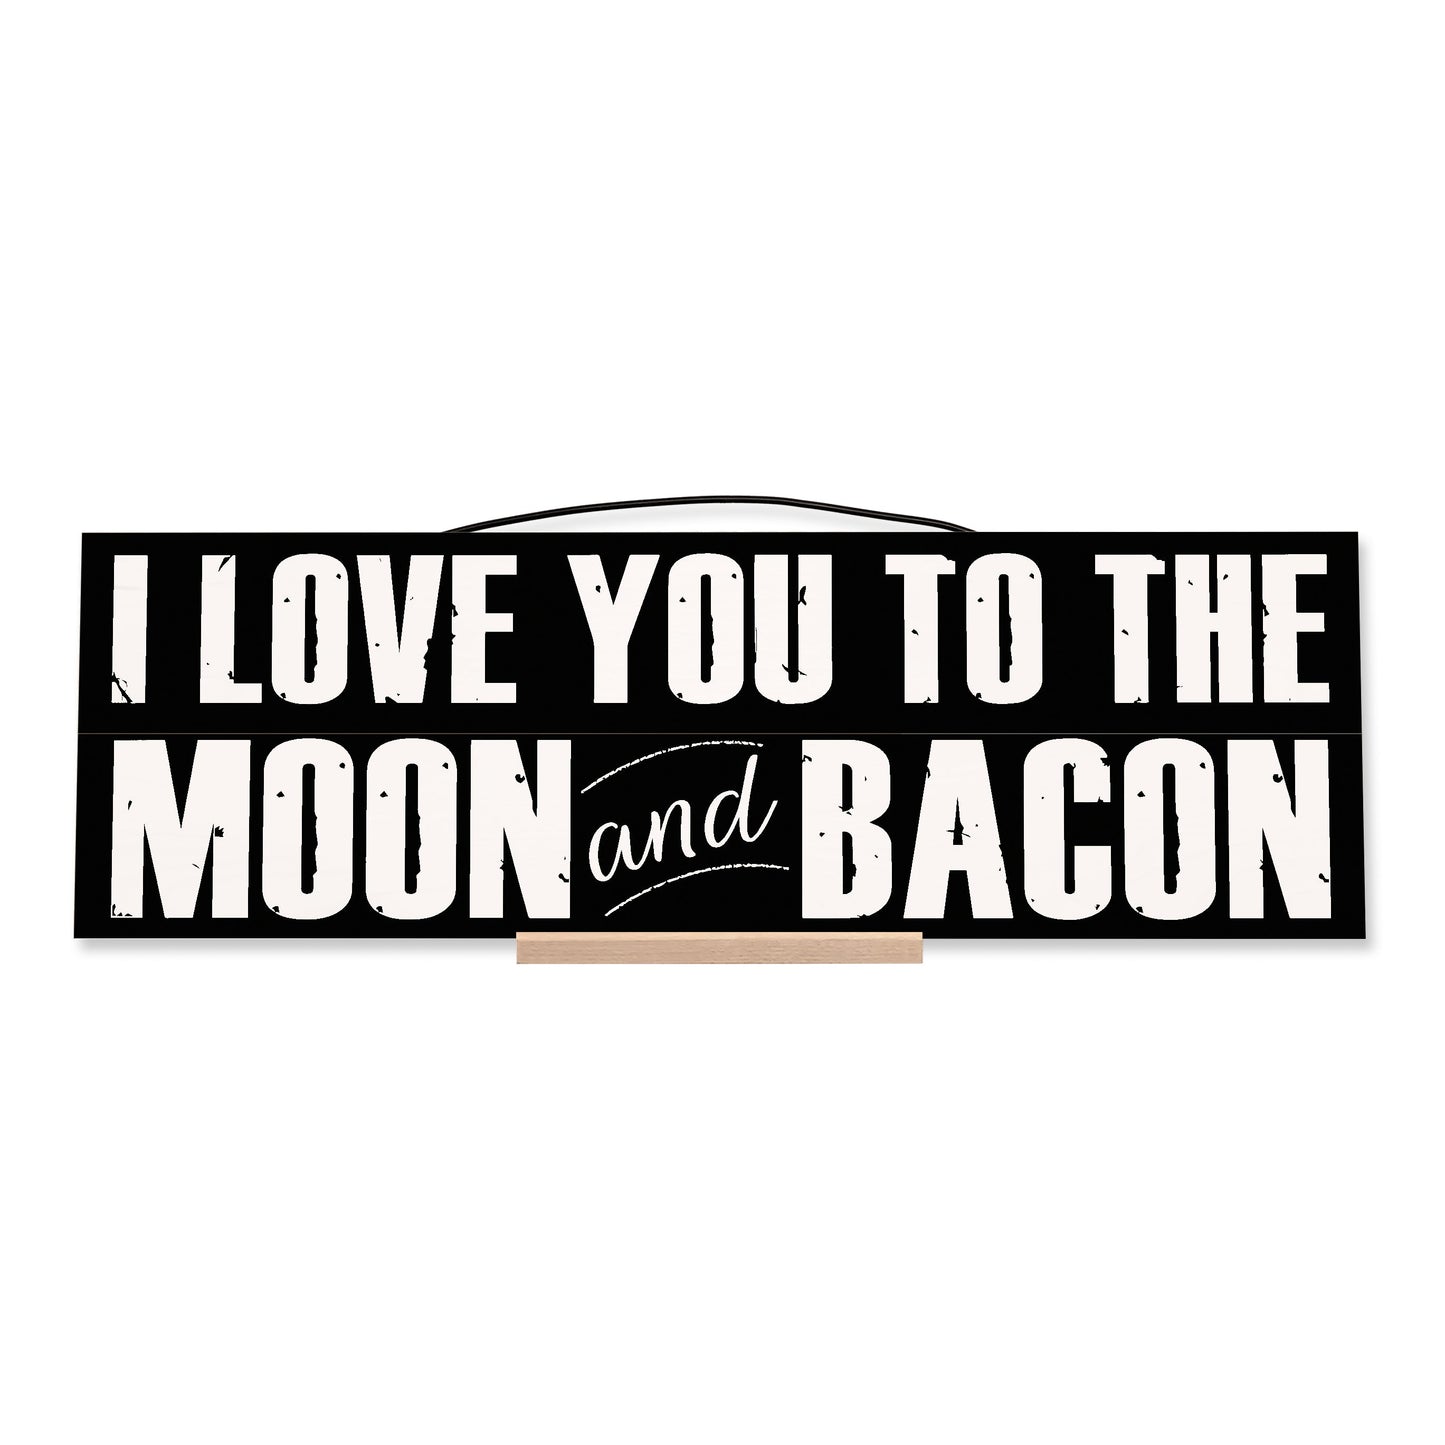 I Love you to the Moon and Bacon.